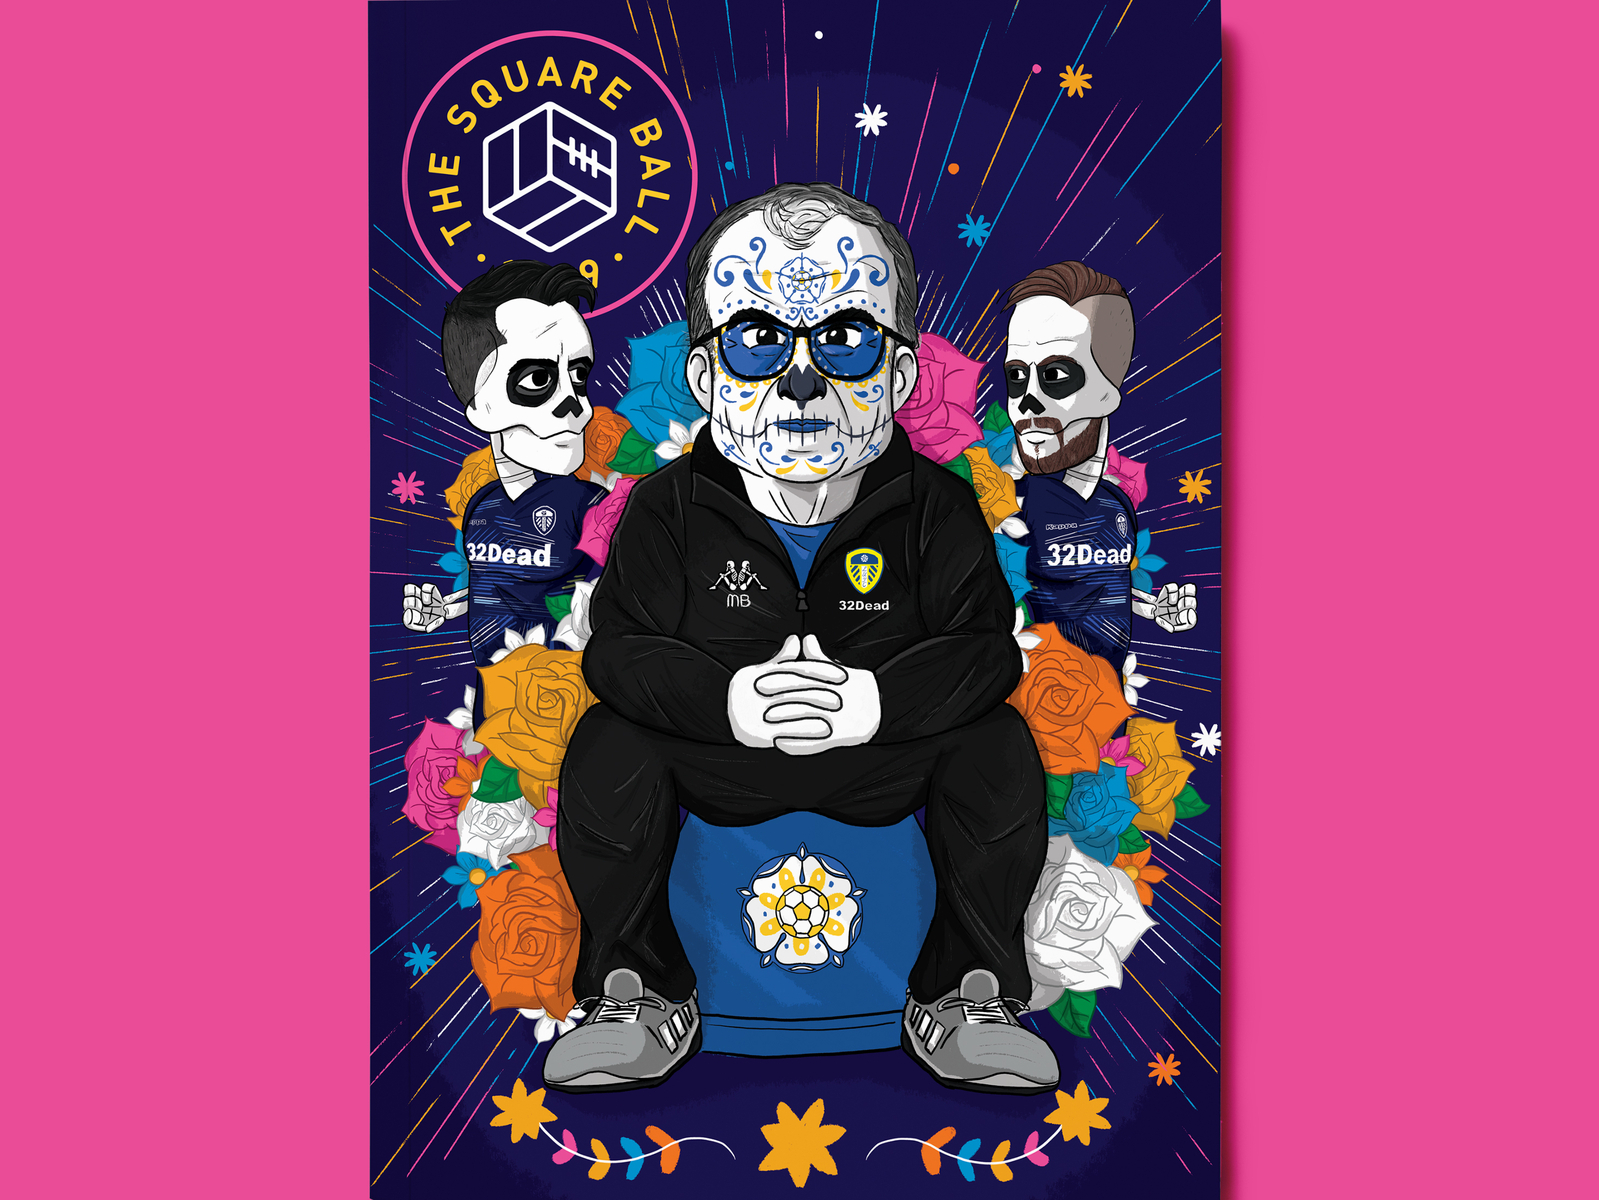 El Loco's Day Of The Dead - The Square Ball bielsa character design day of the dead digital art día de muertos flowers football illustration leeds united magazine player skeletons soccer